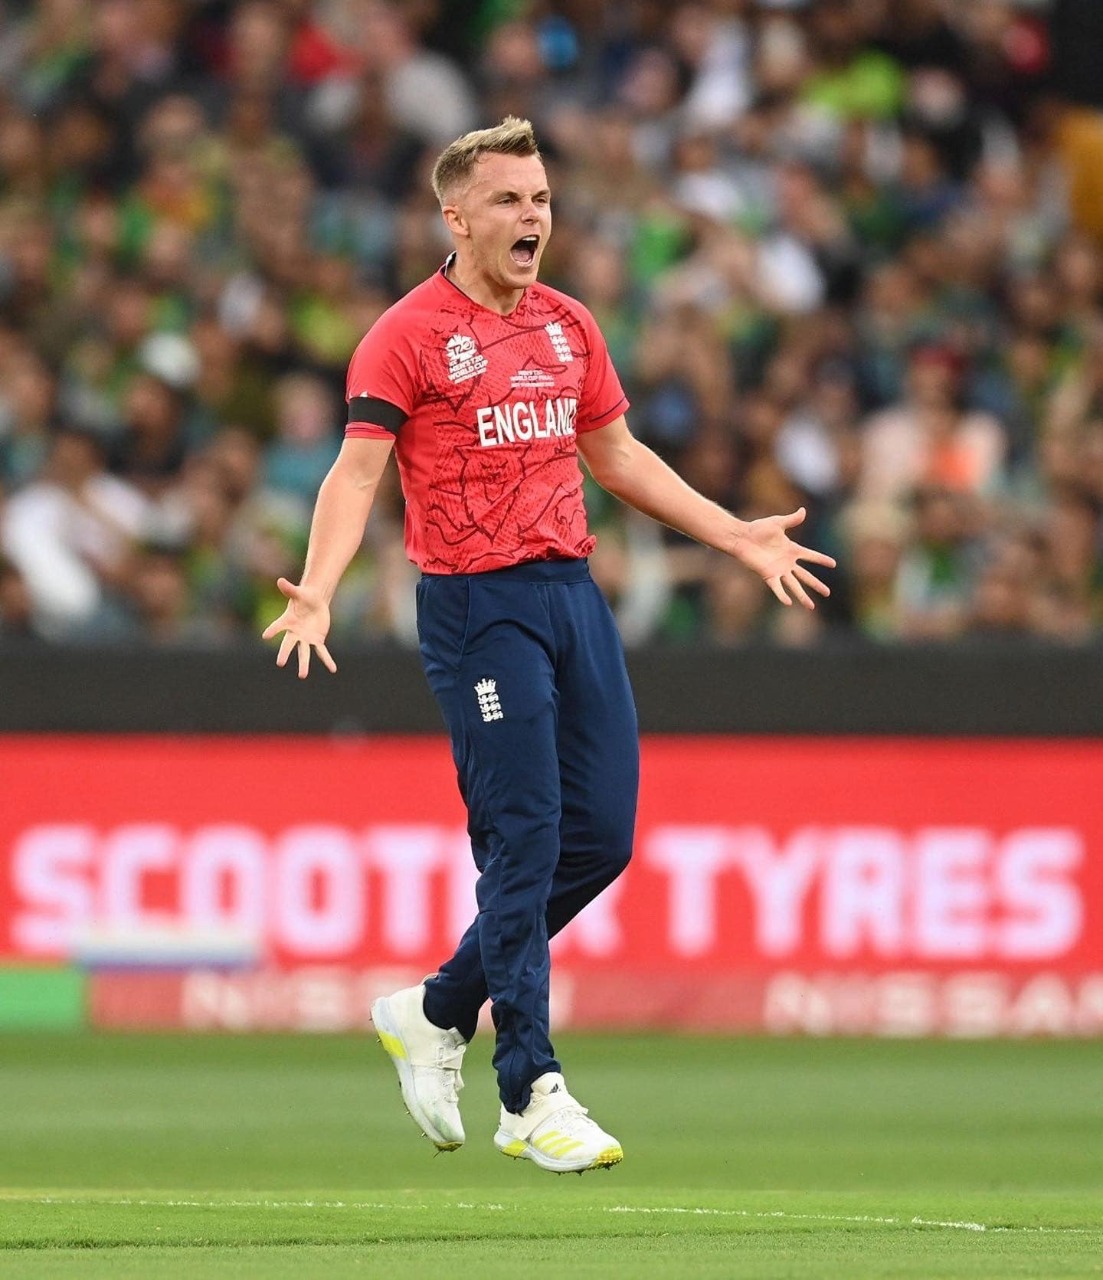 England all-rounder Sam Curran became the most expensive player.